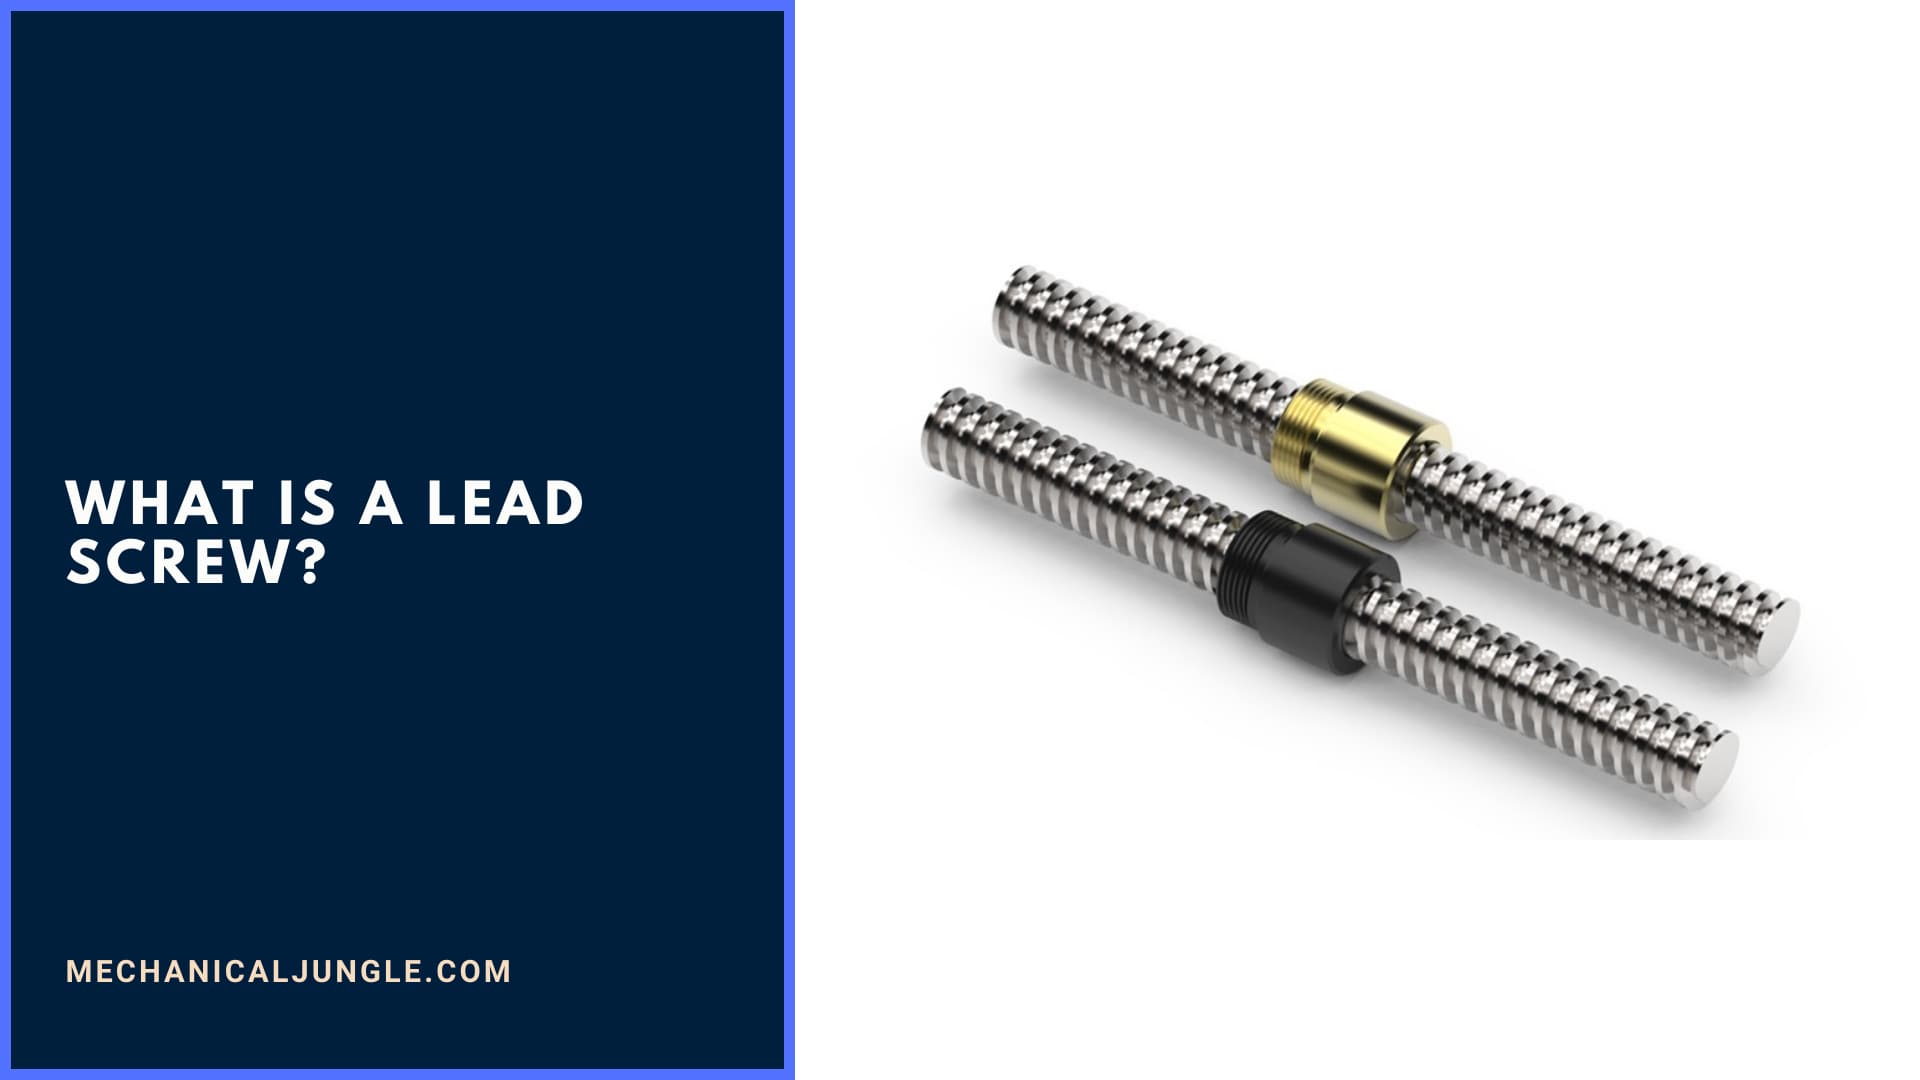 What Is a Lead Screw?